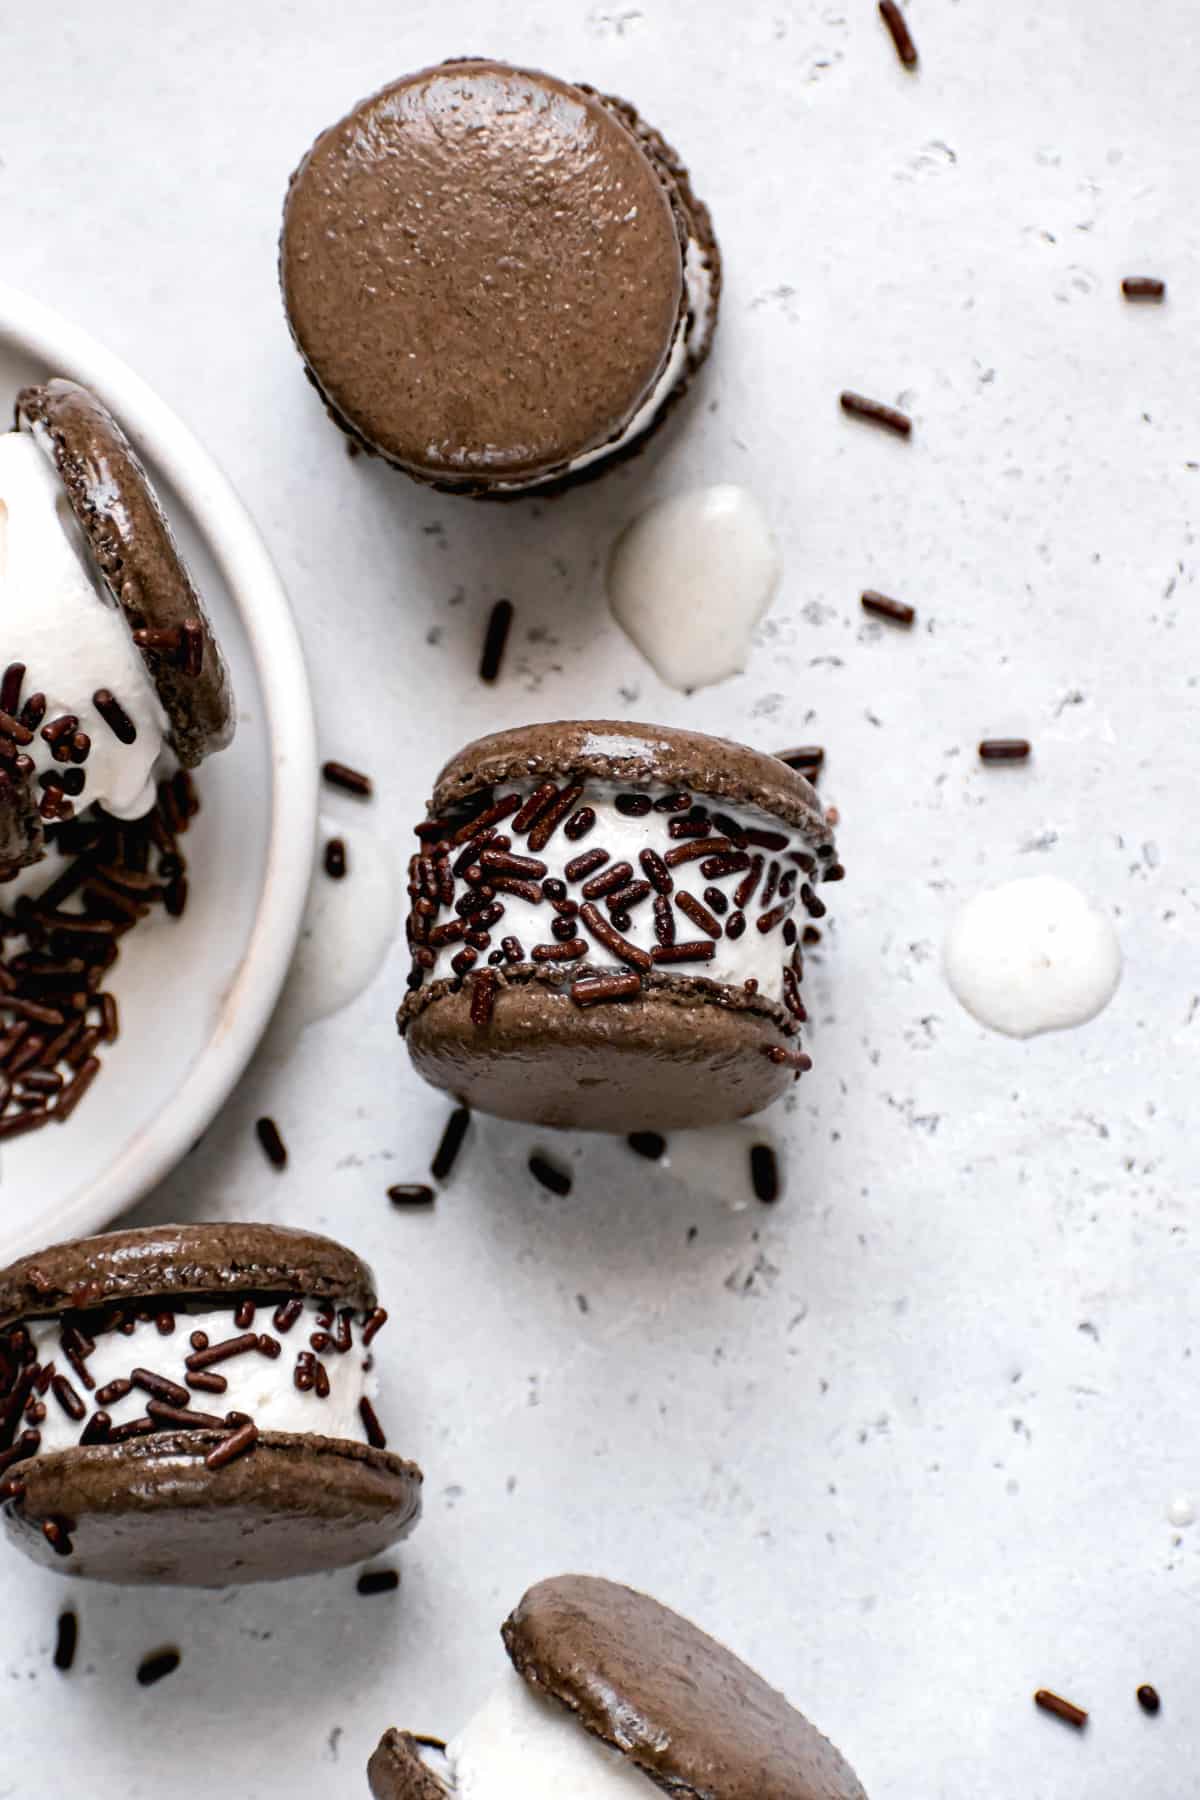 macaron ice cream sandwich with chocolate jimmy sprinkles on a white background.